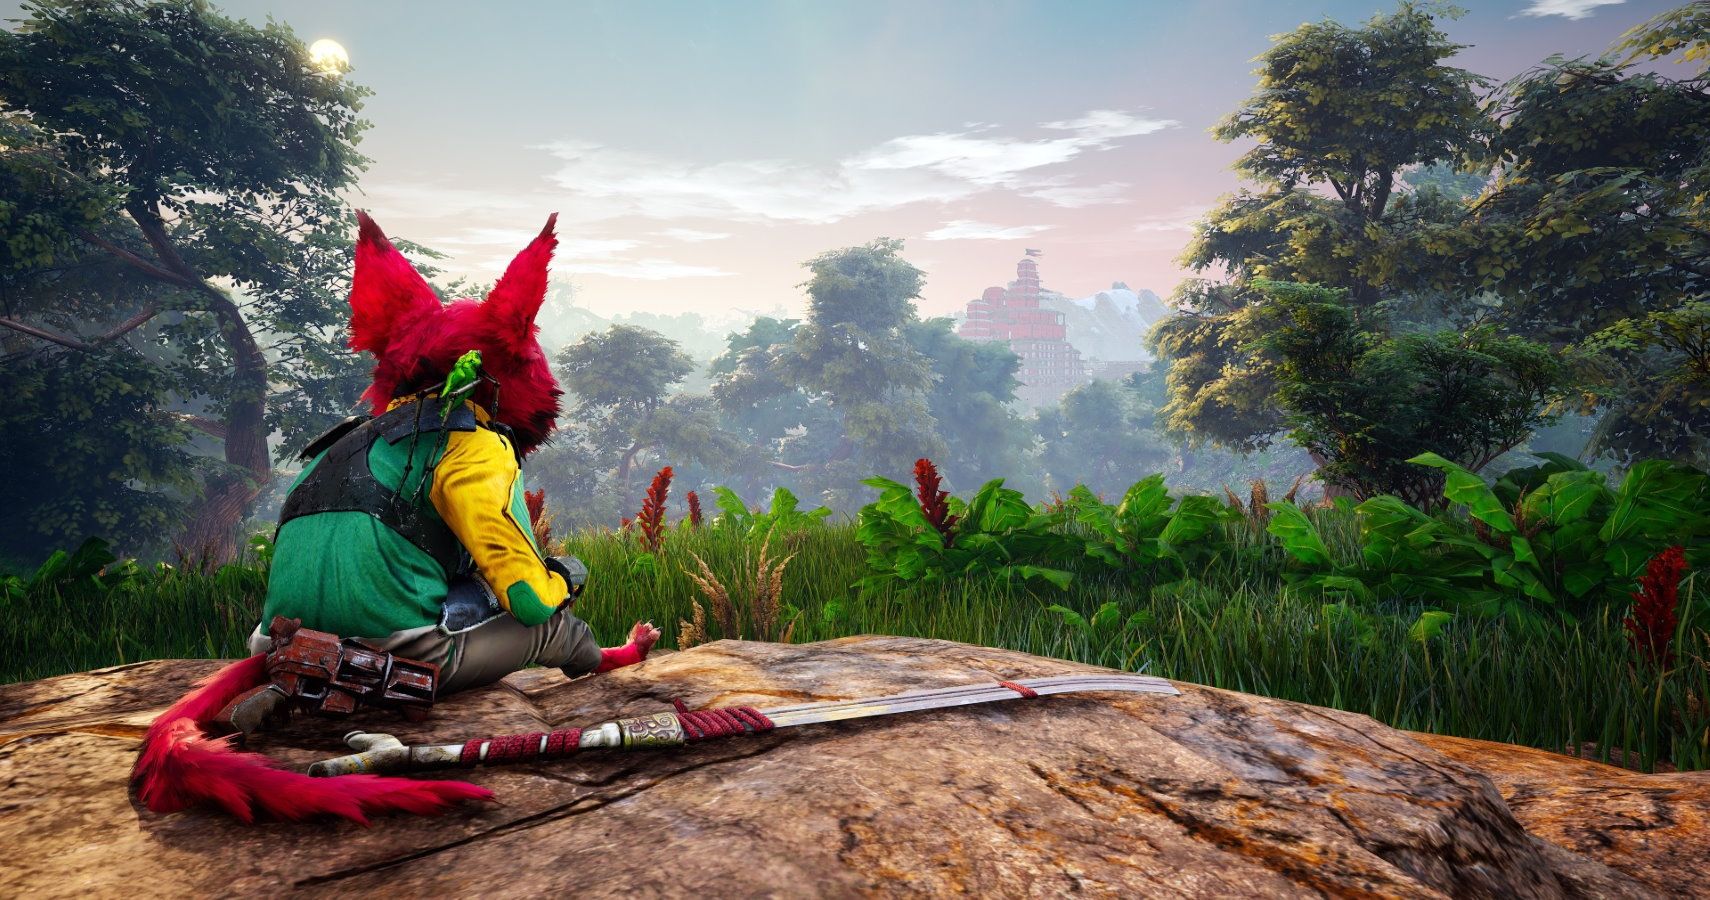 Do You Hate Biomutant Or Are You Just Done With OpenWorld Games